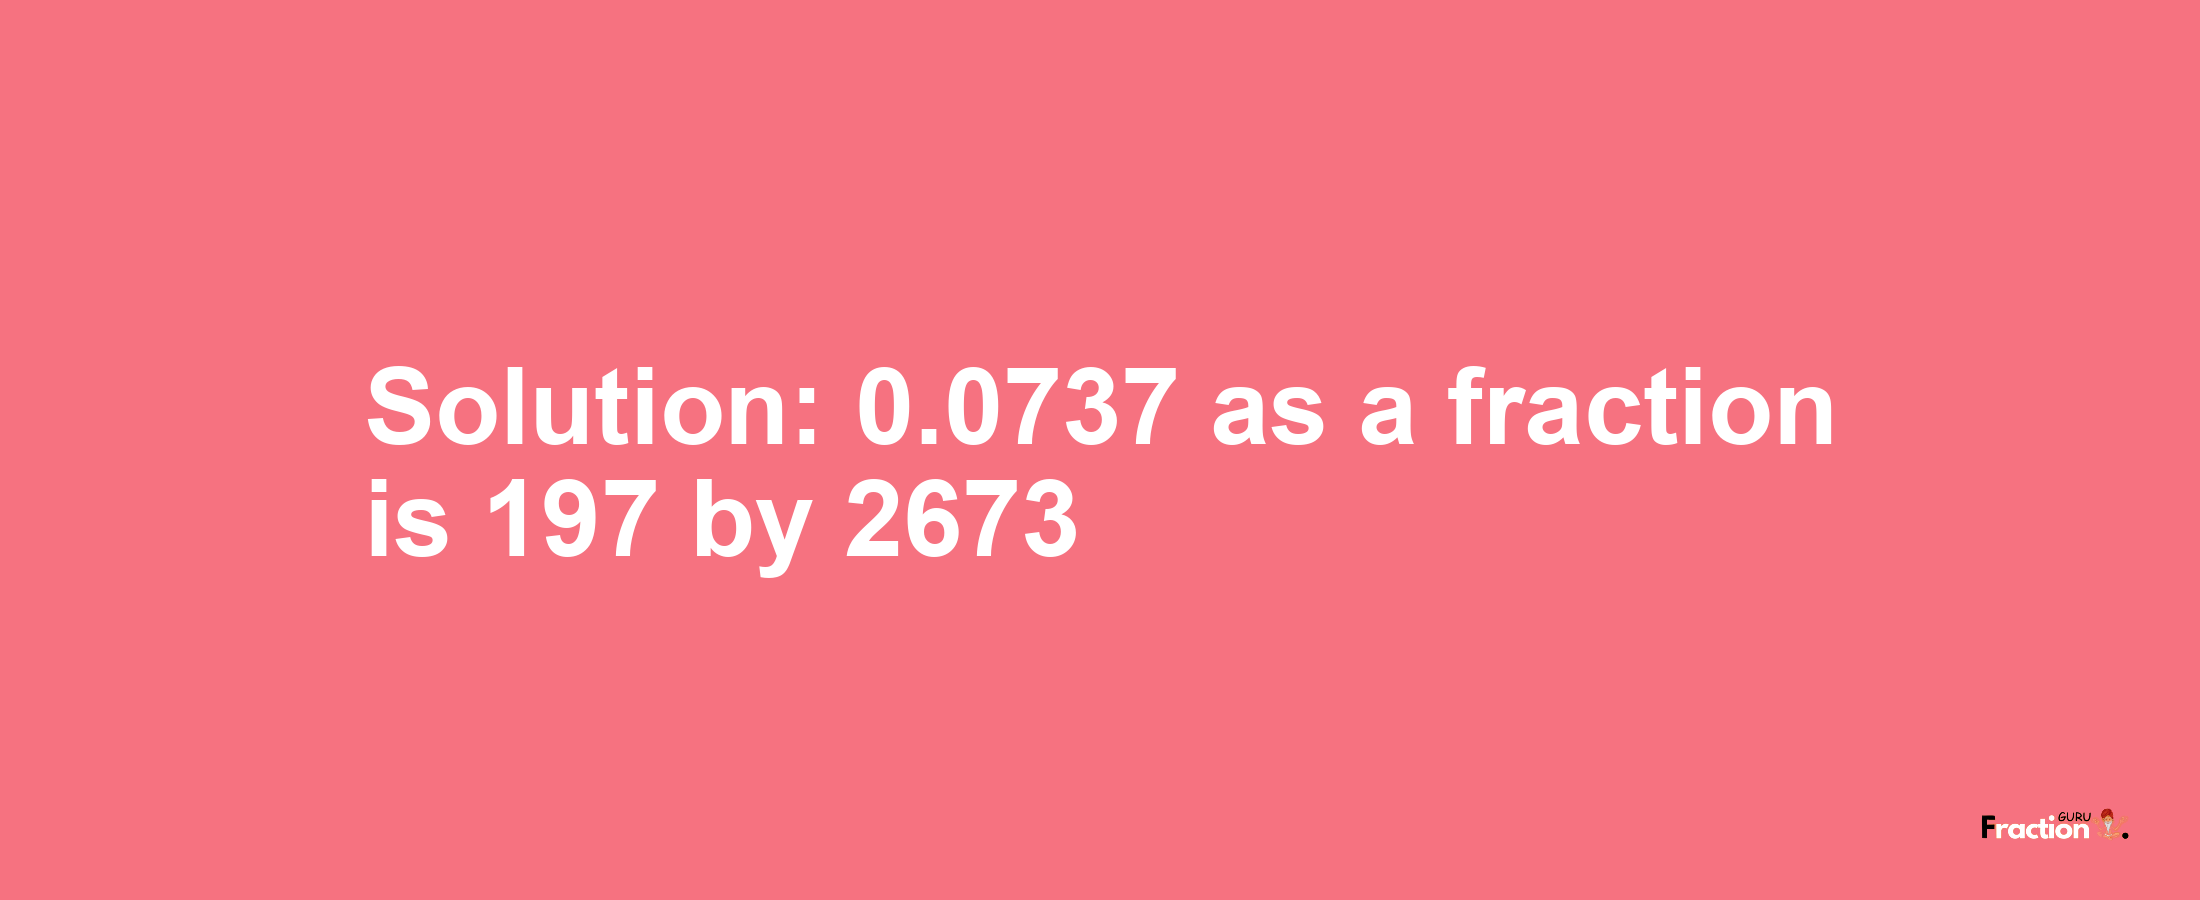 Solution:0.0737 as a fraction is 197/2673